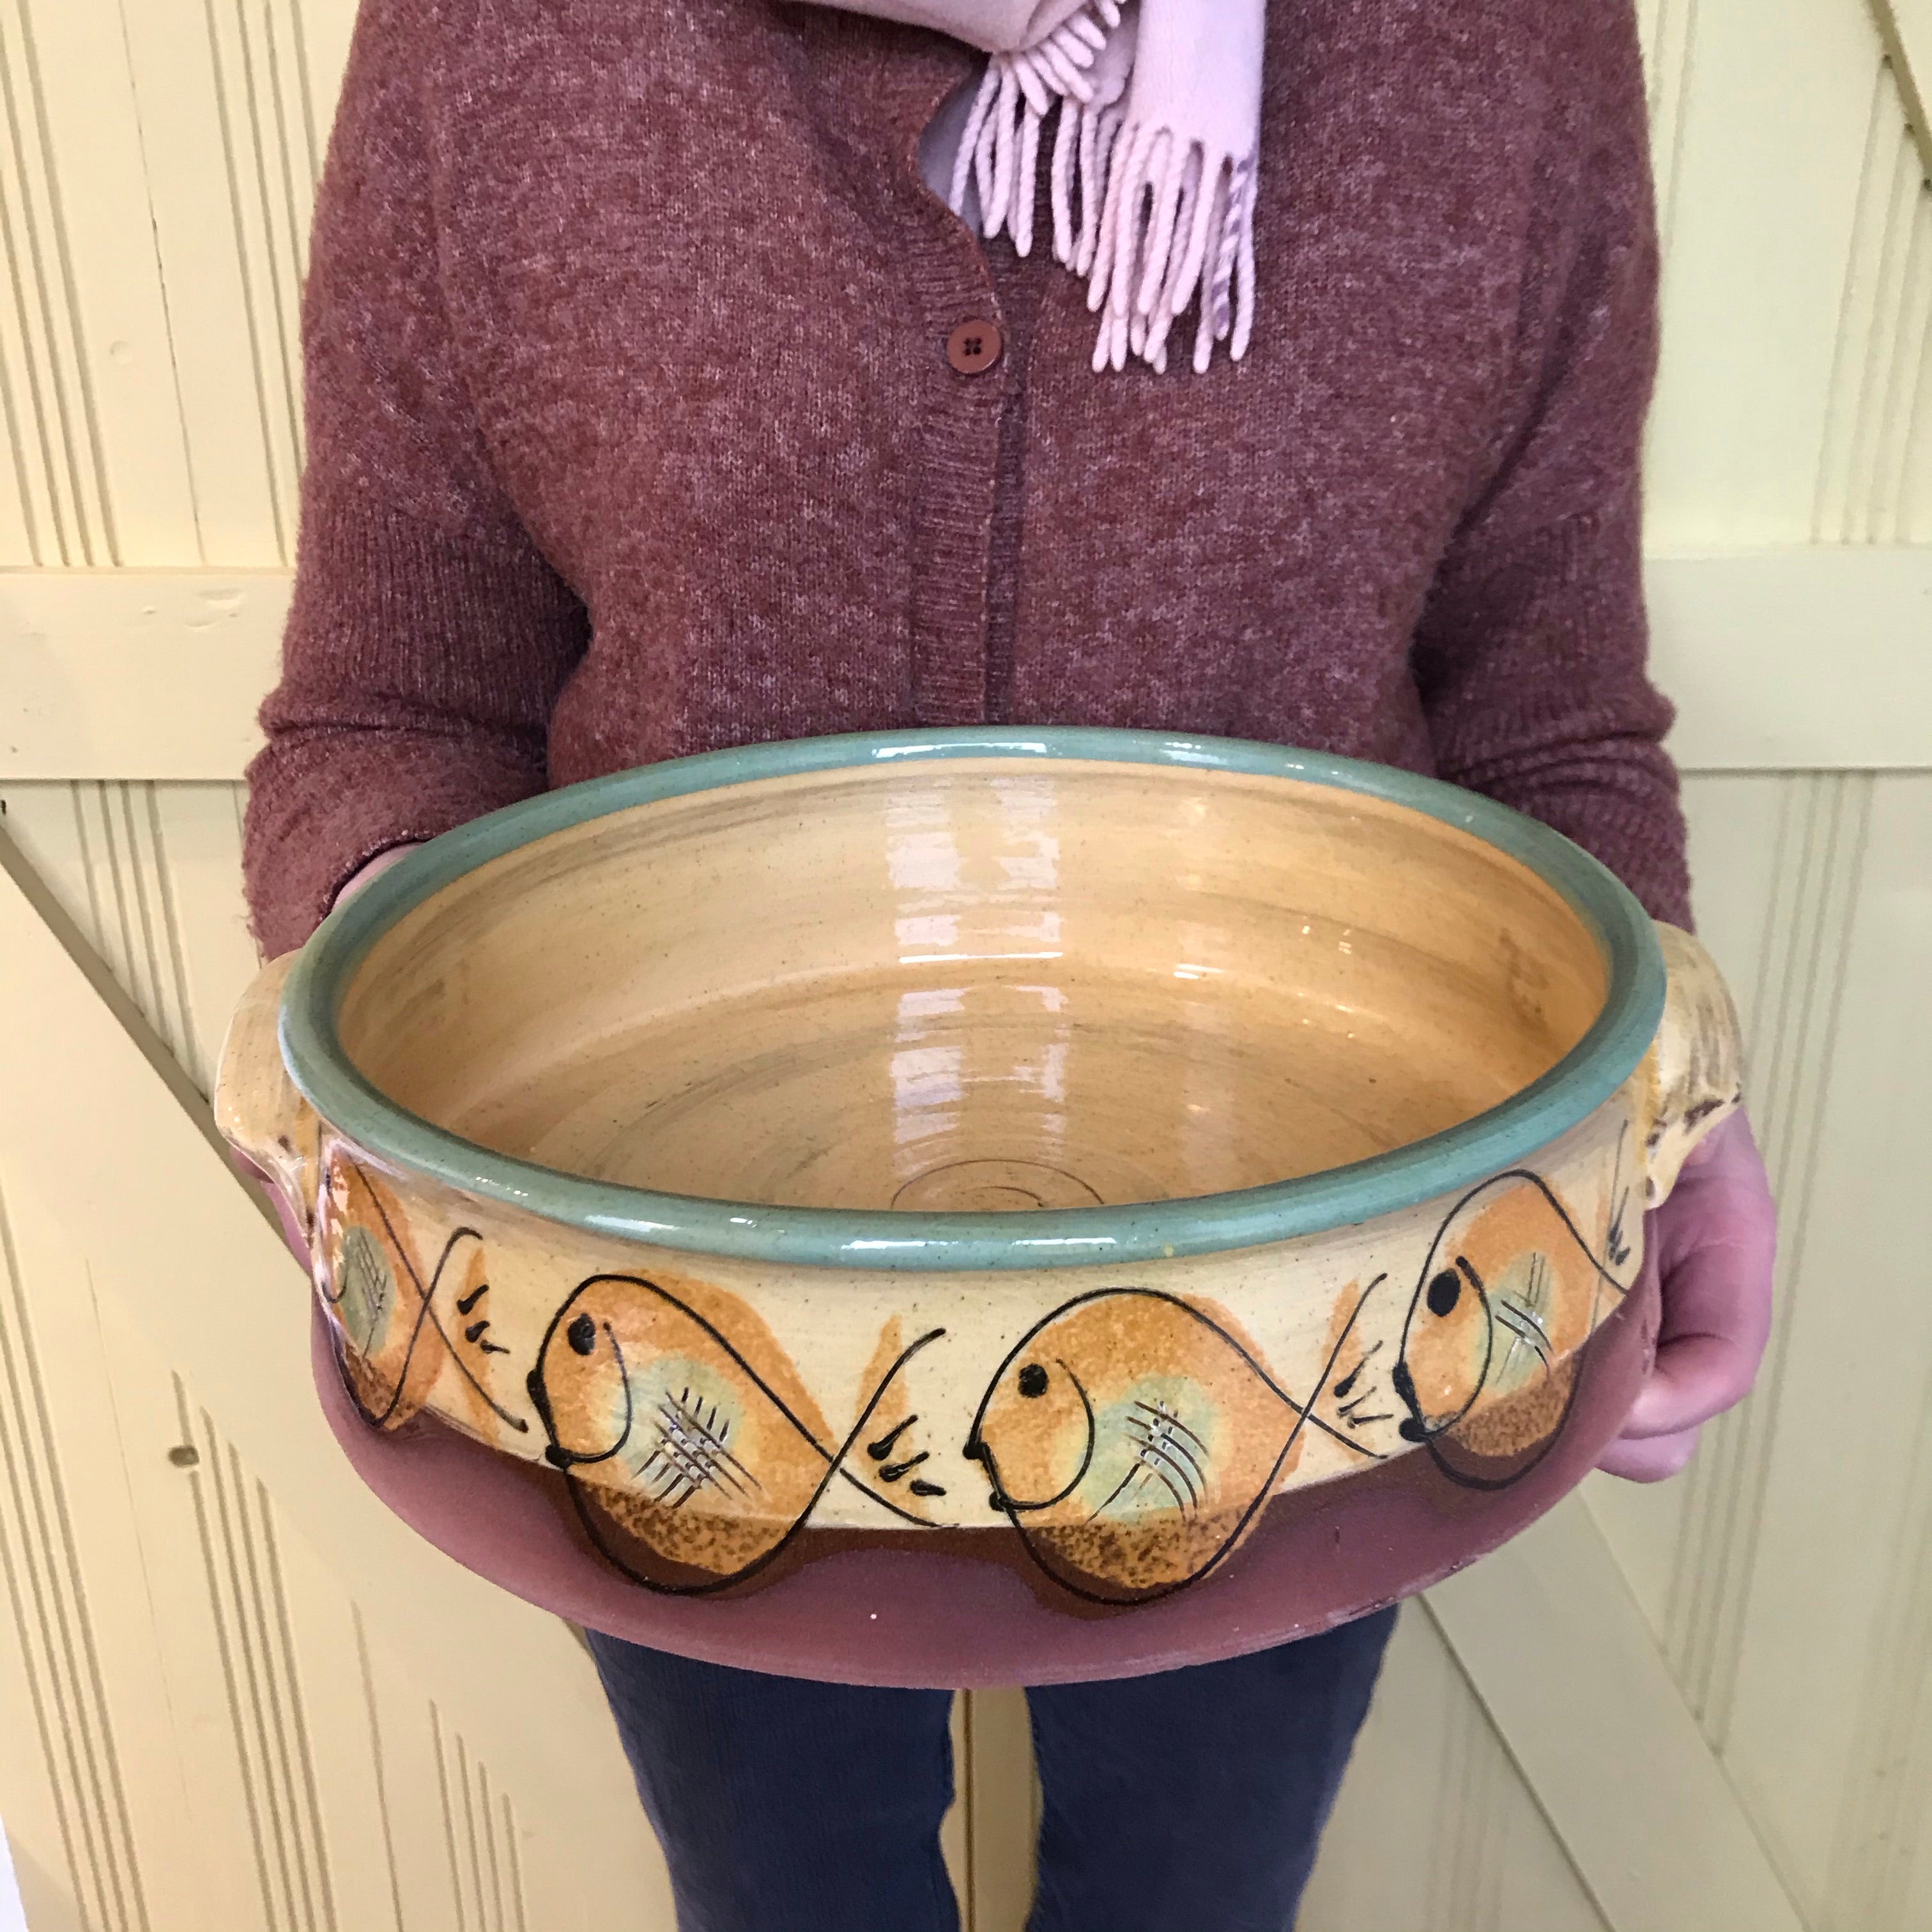 Large Cream and Turquoise Pie Dish with Handles